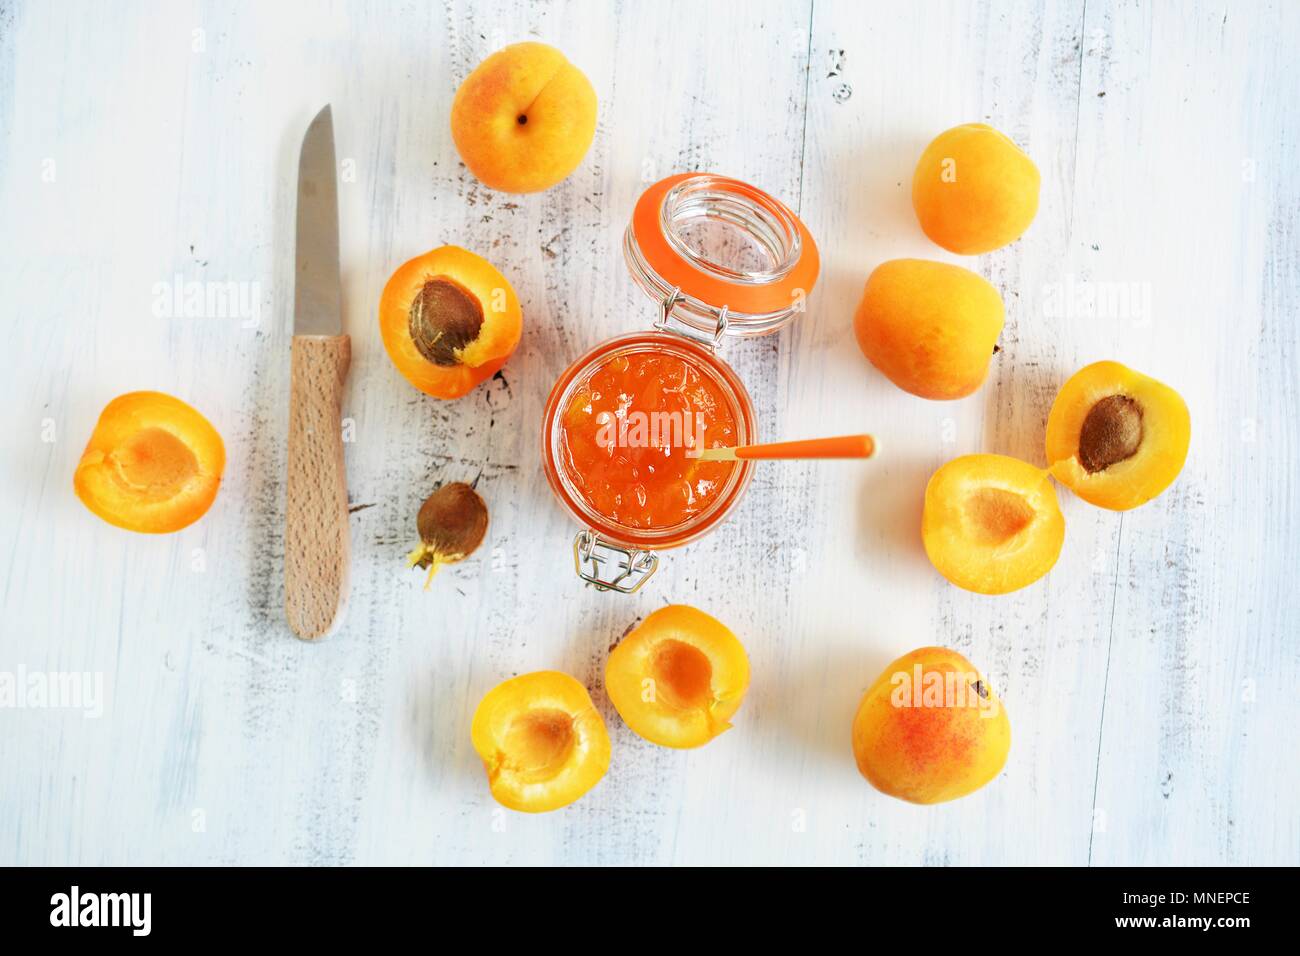 A jar of apricot jam and apricots Stock Photo